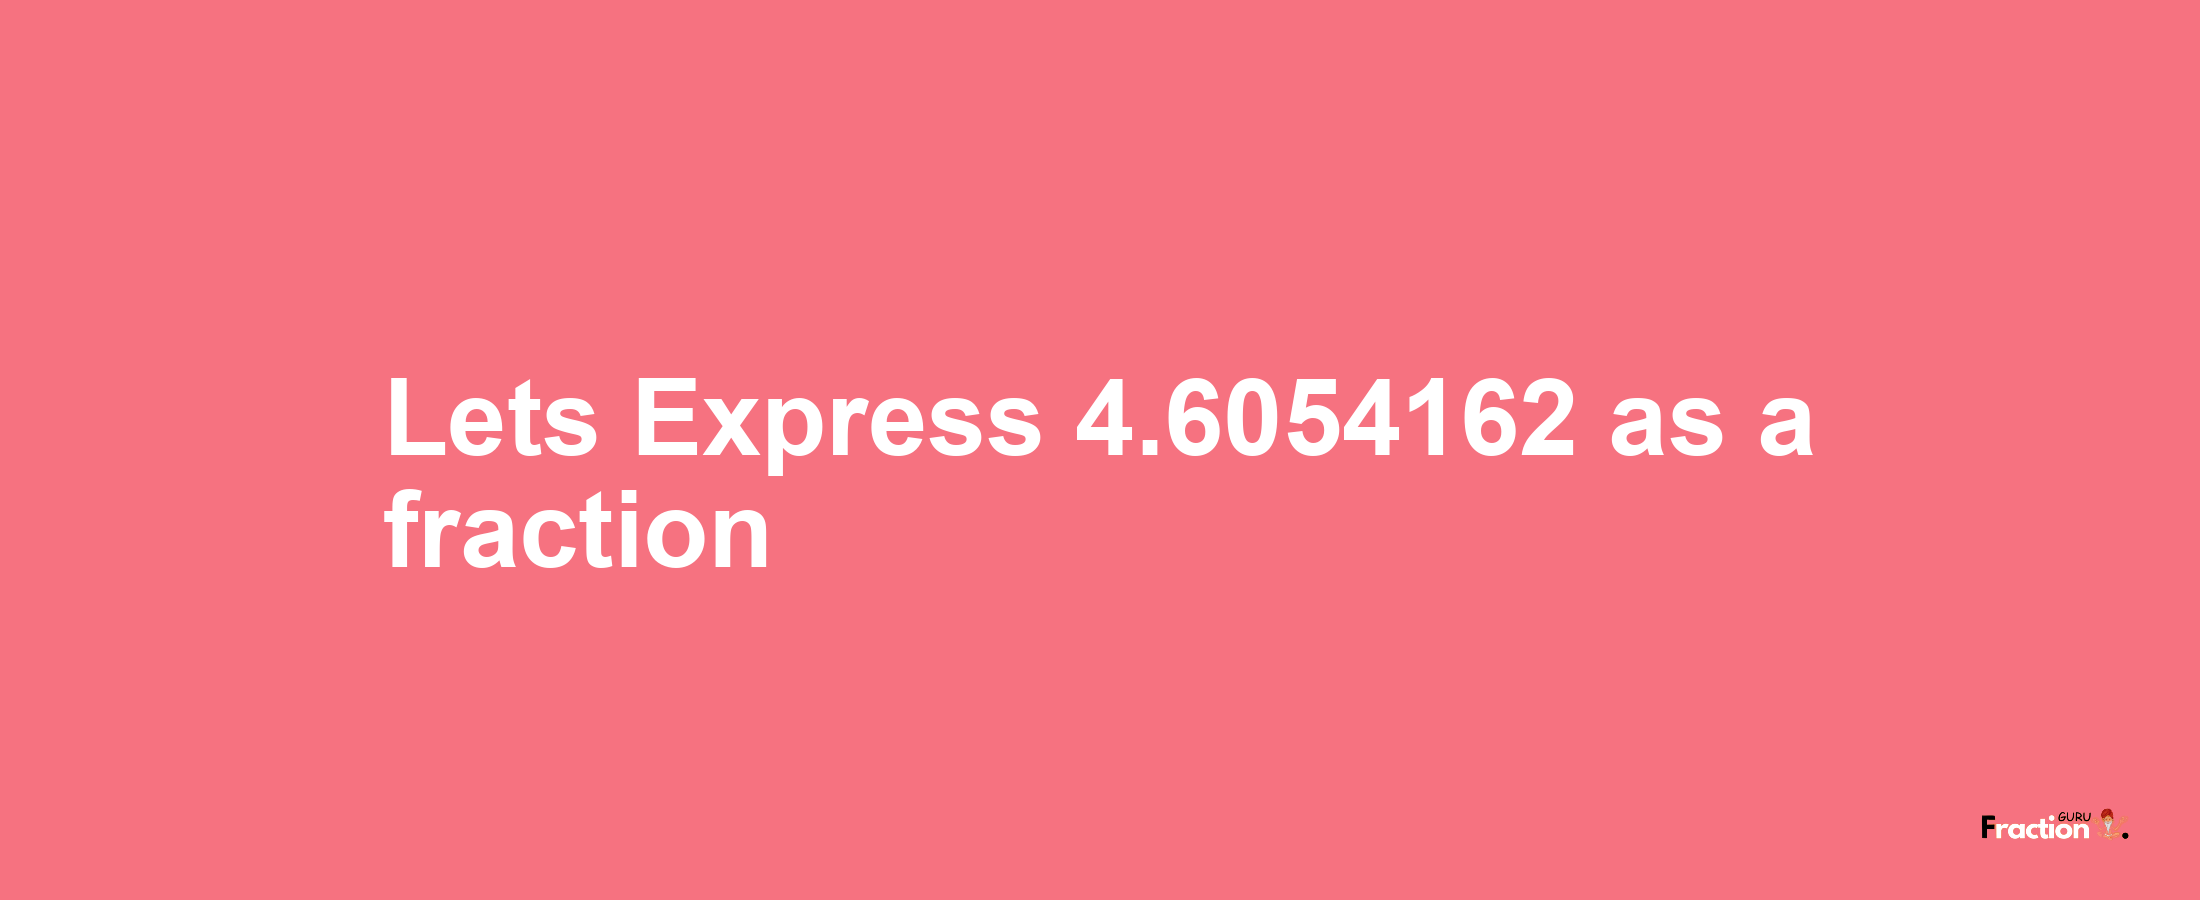 Lets Express 4.6054162 as afraction